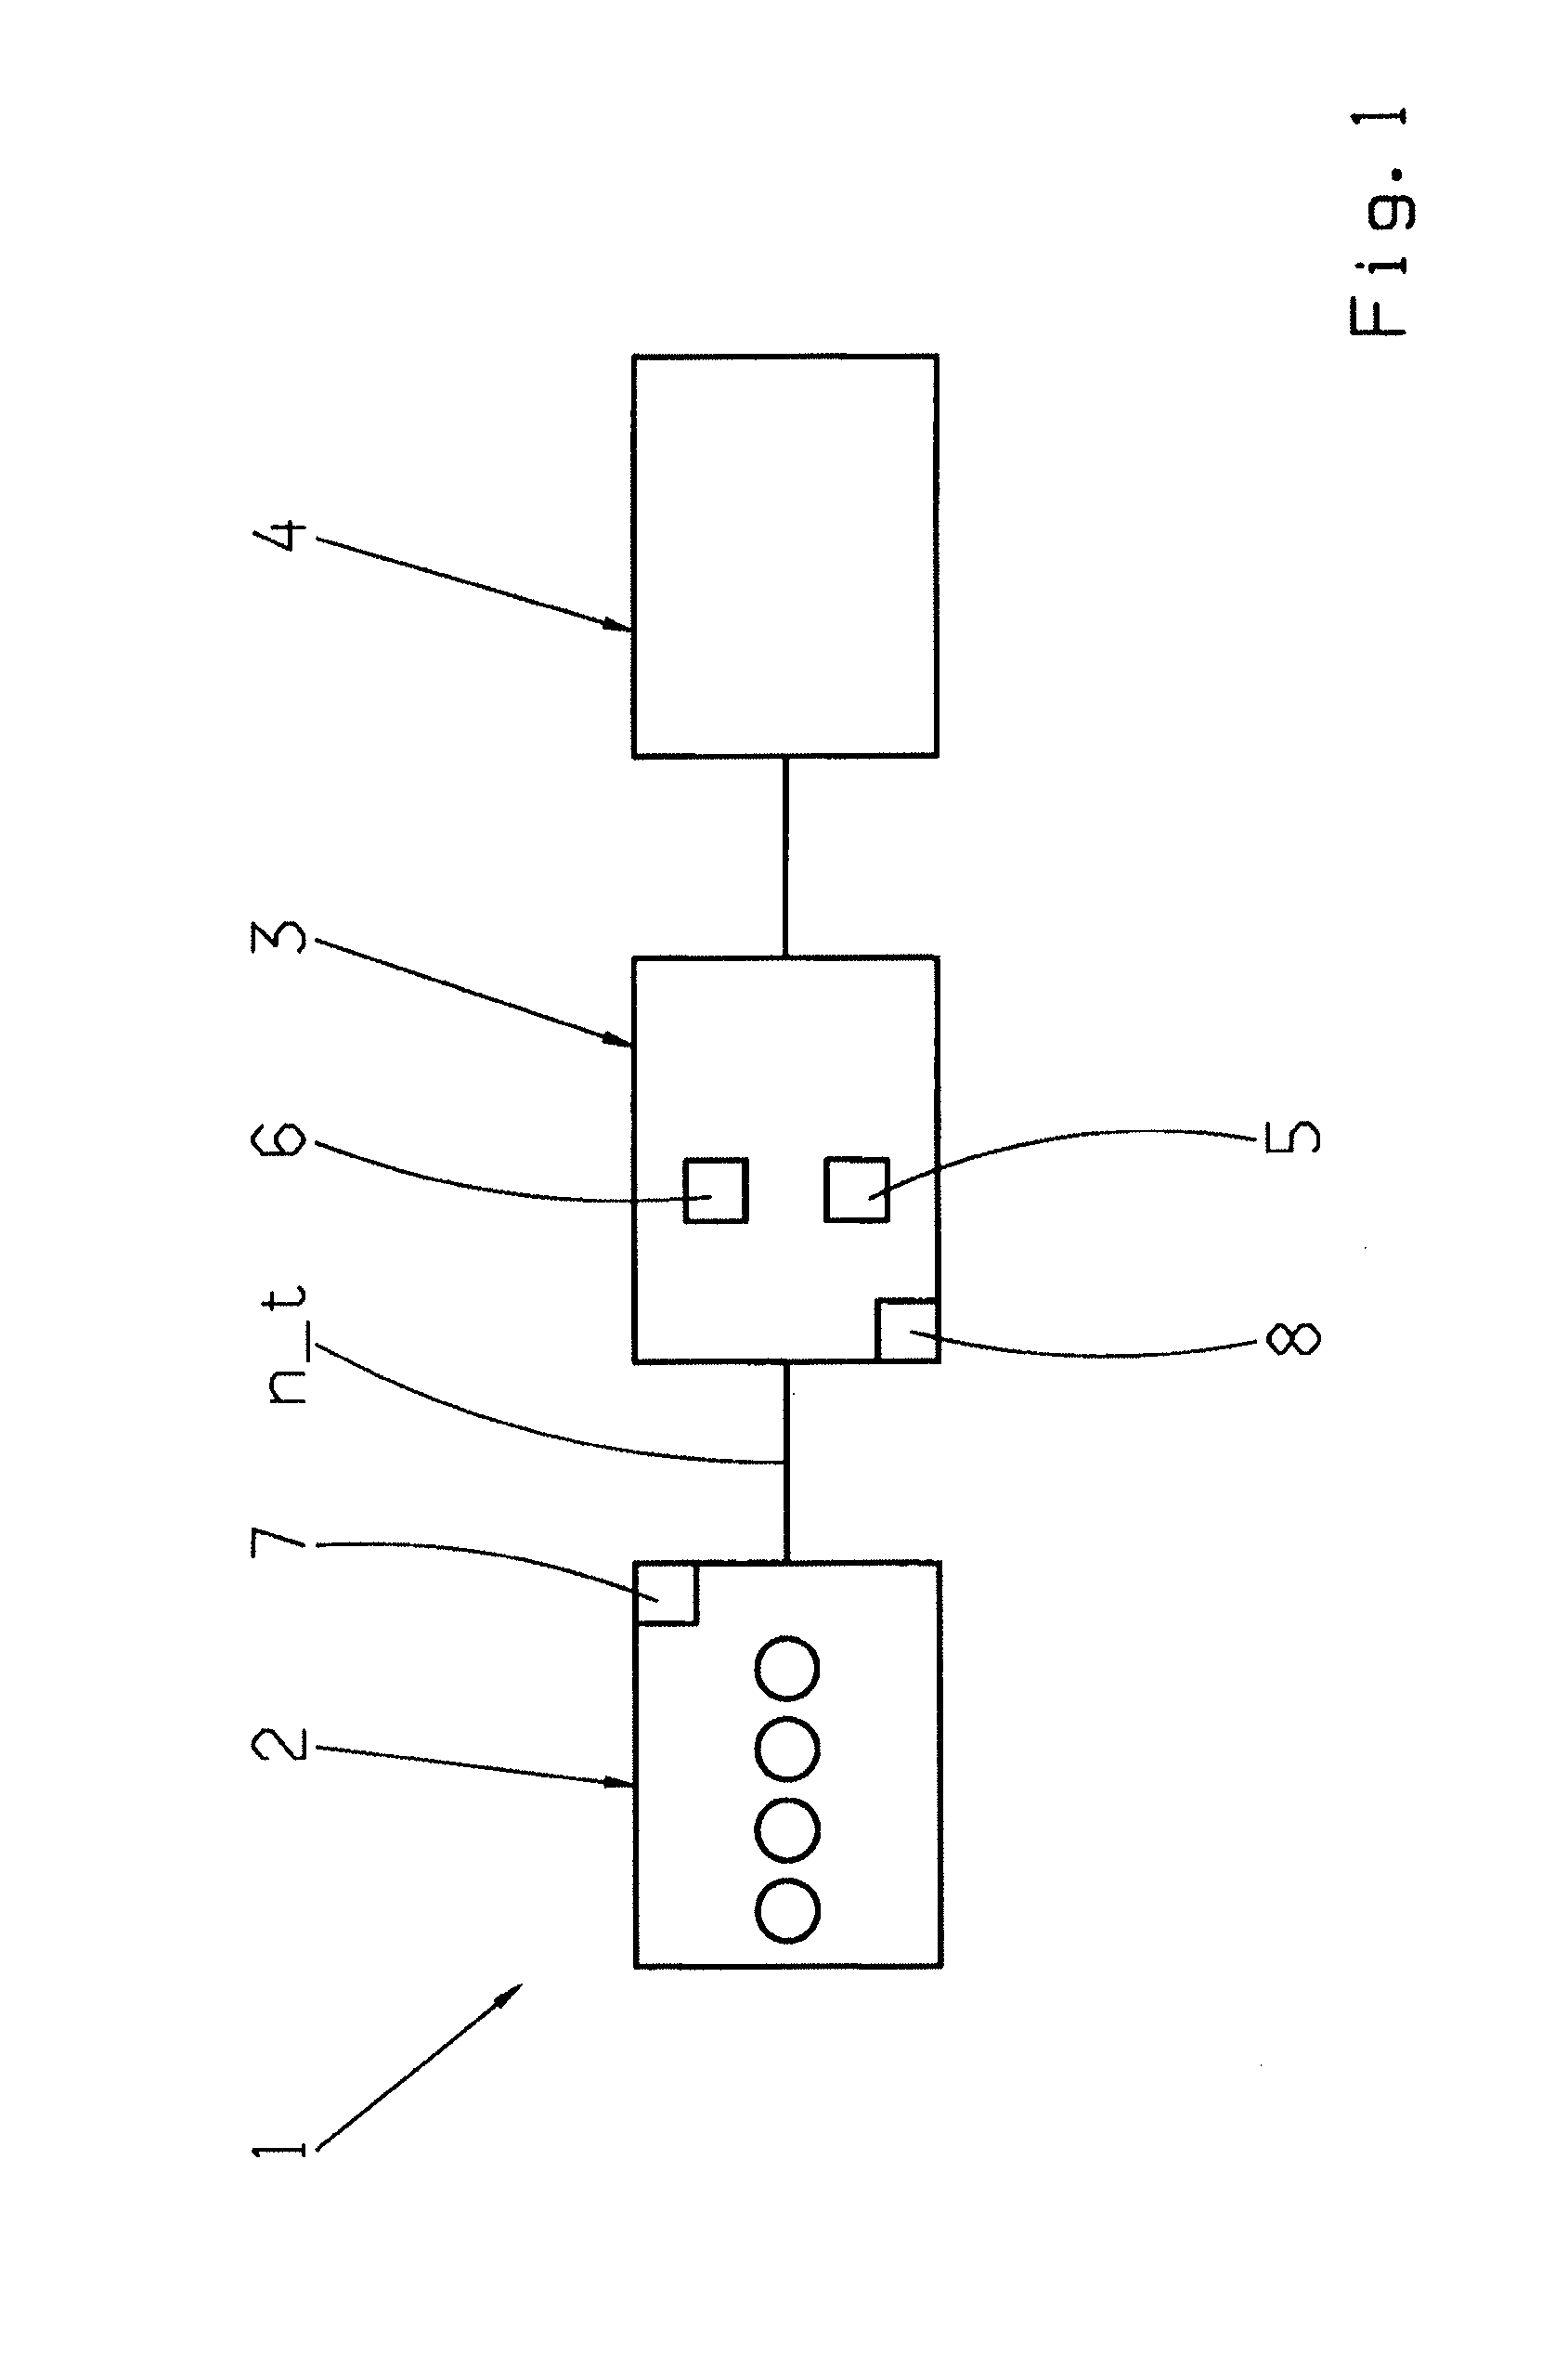 Method for operating a vehicle drive train